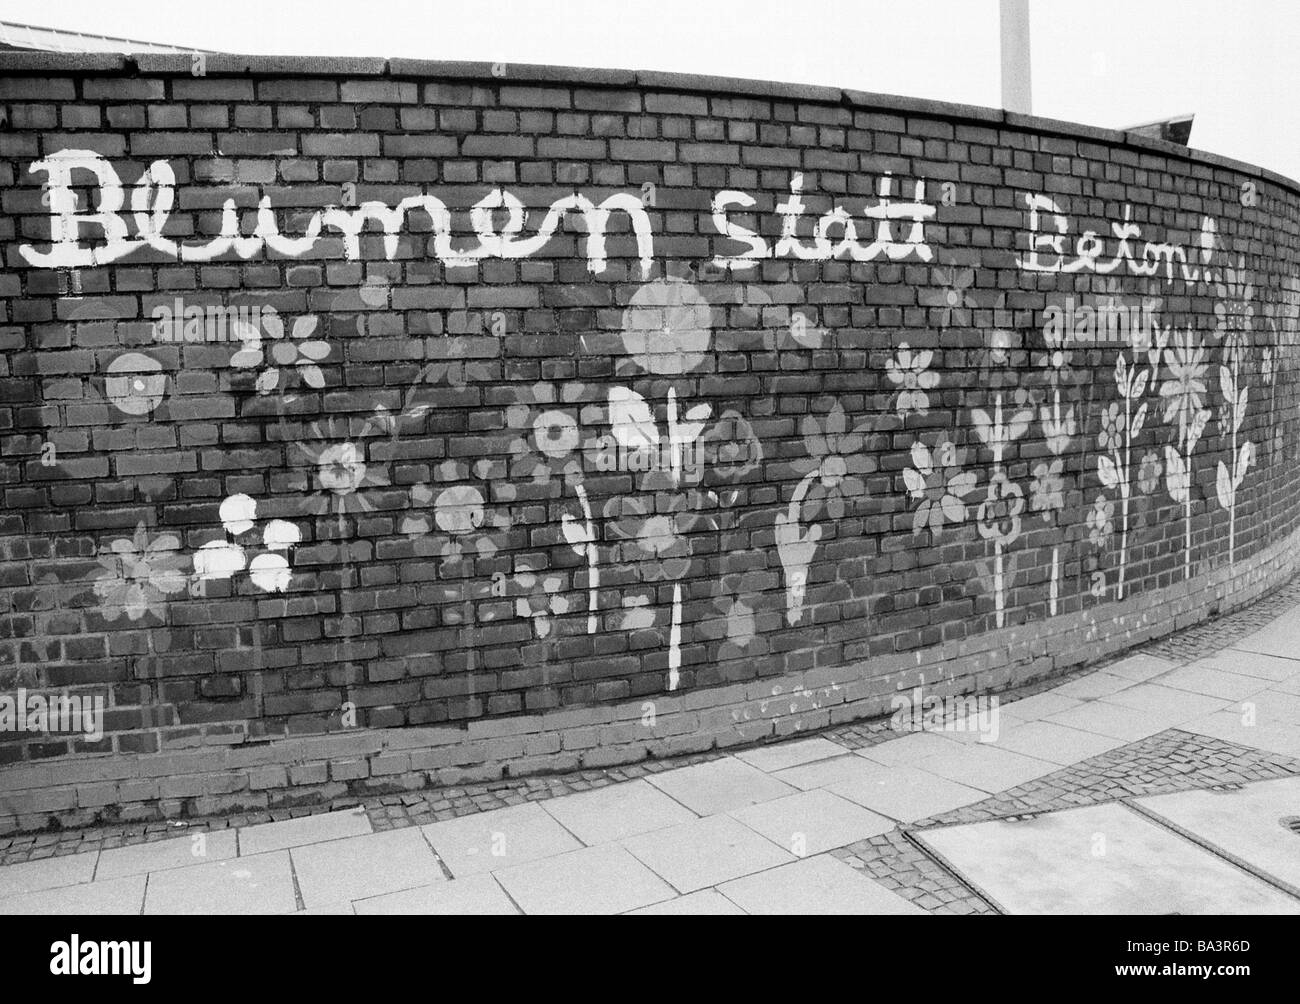 Eighties, black and white photo, ecology, brick wall painted with flowers, slogan 'flowers rather than beton' Stock Photo